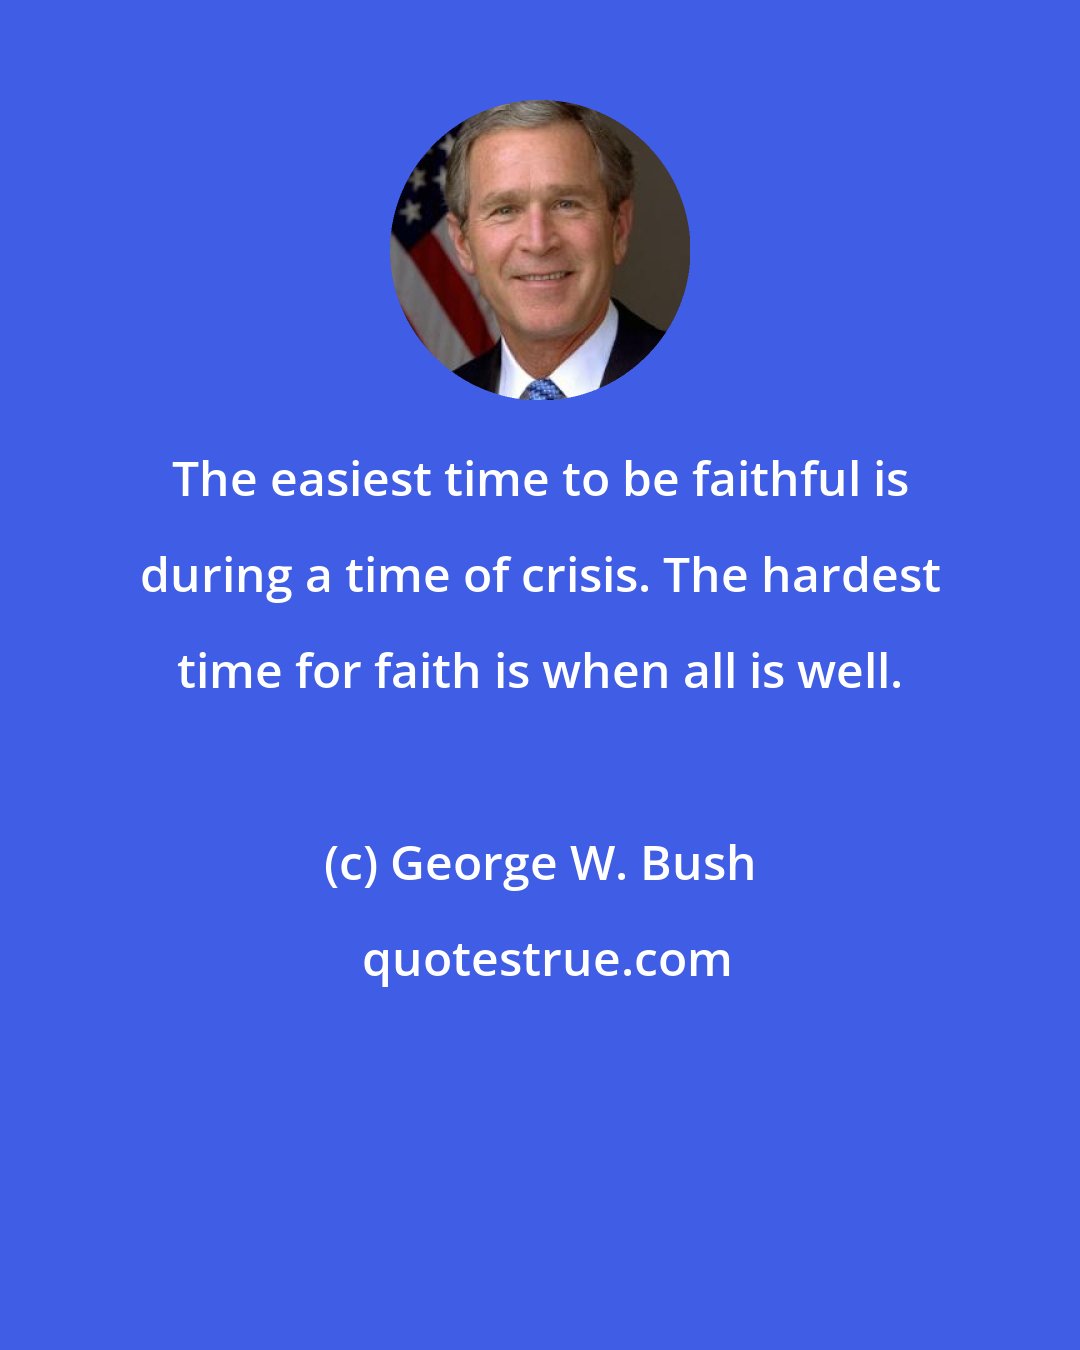 George W. Bush: The easiest time to be faithful is during a time of crisis. The hardest time for faith is when all is well.